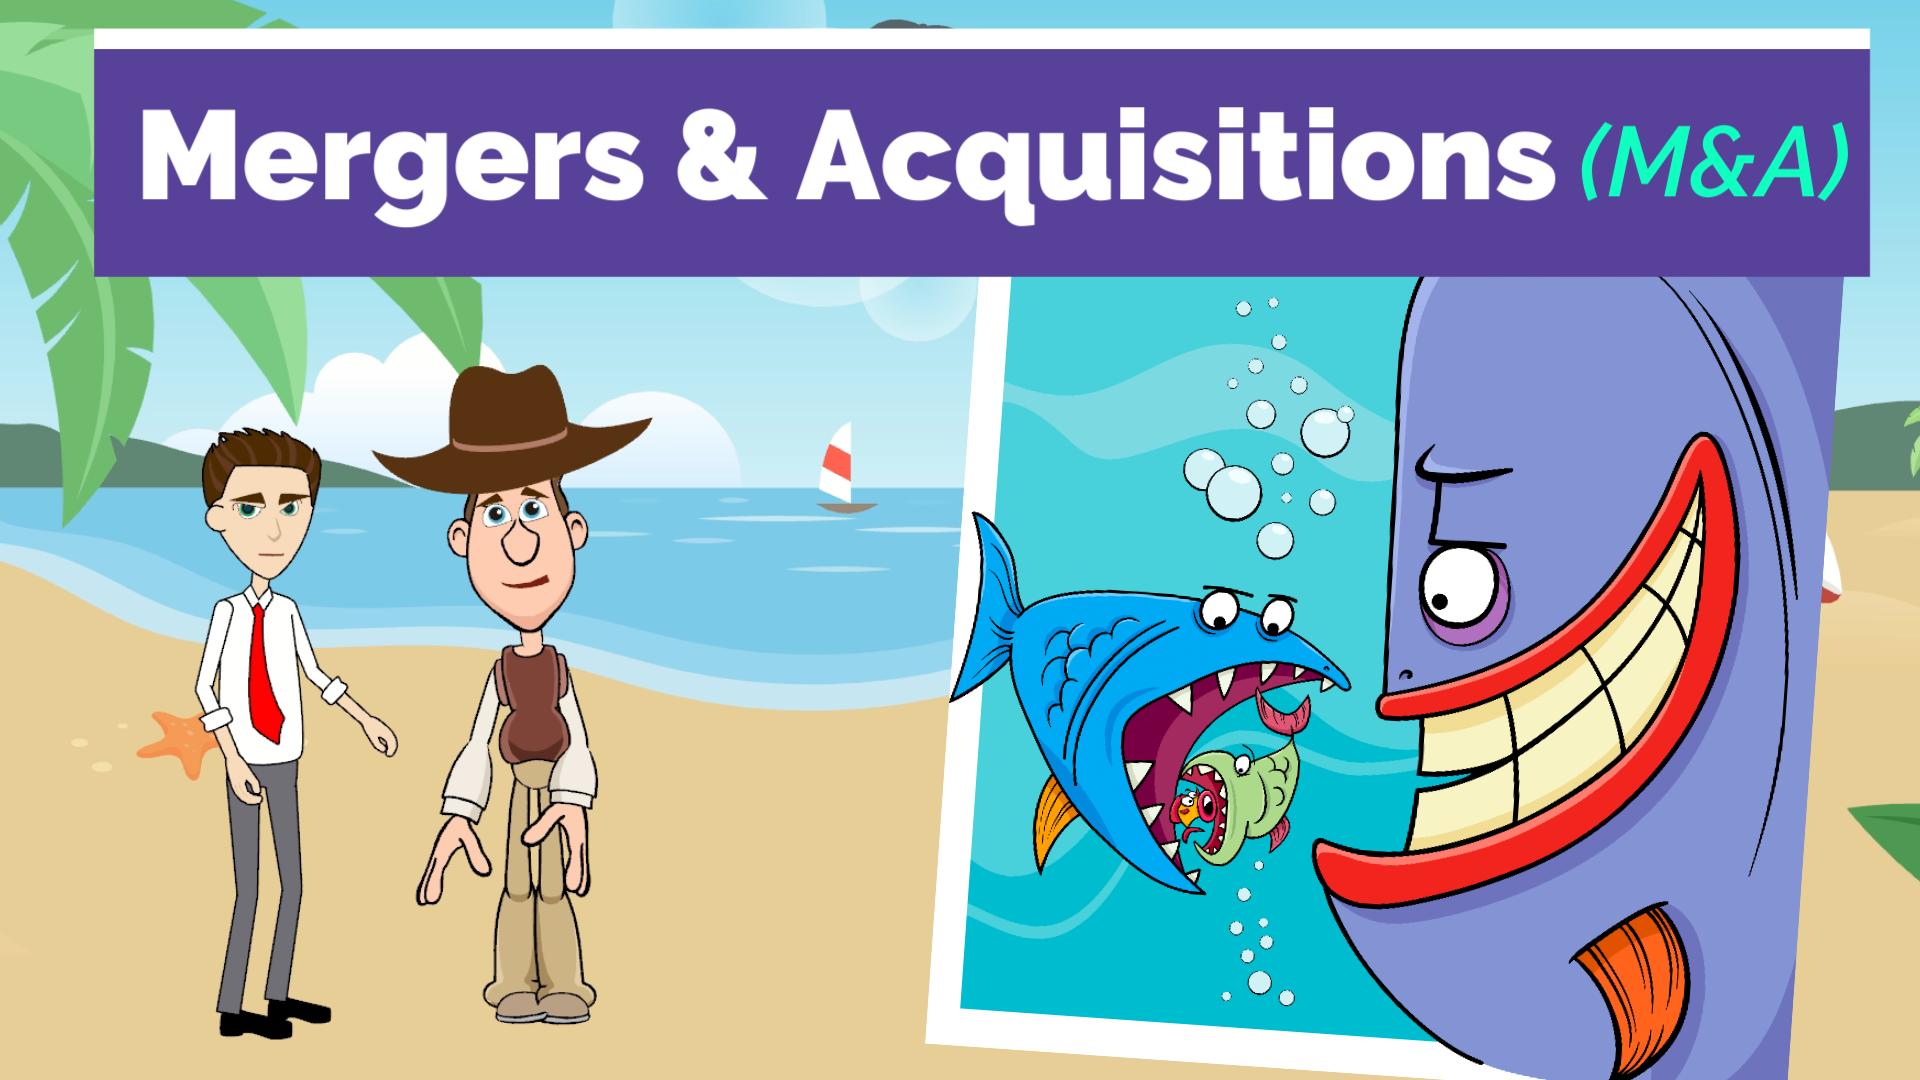 What are Mergers and Acquisitions